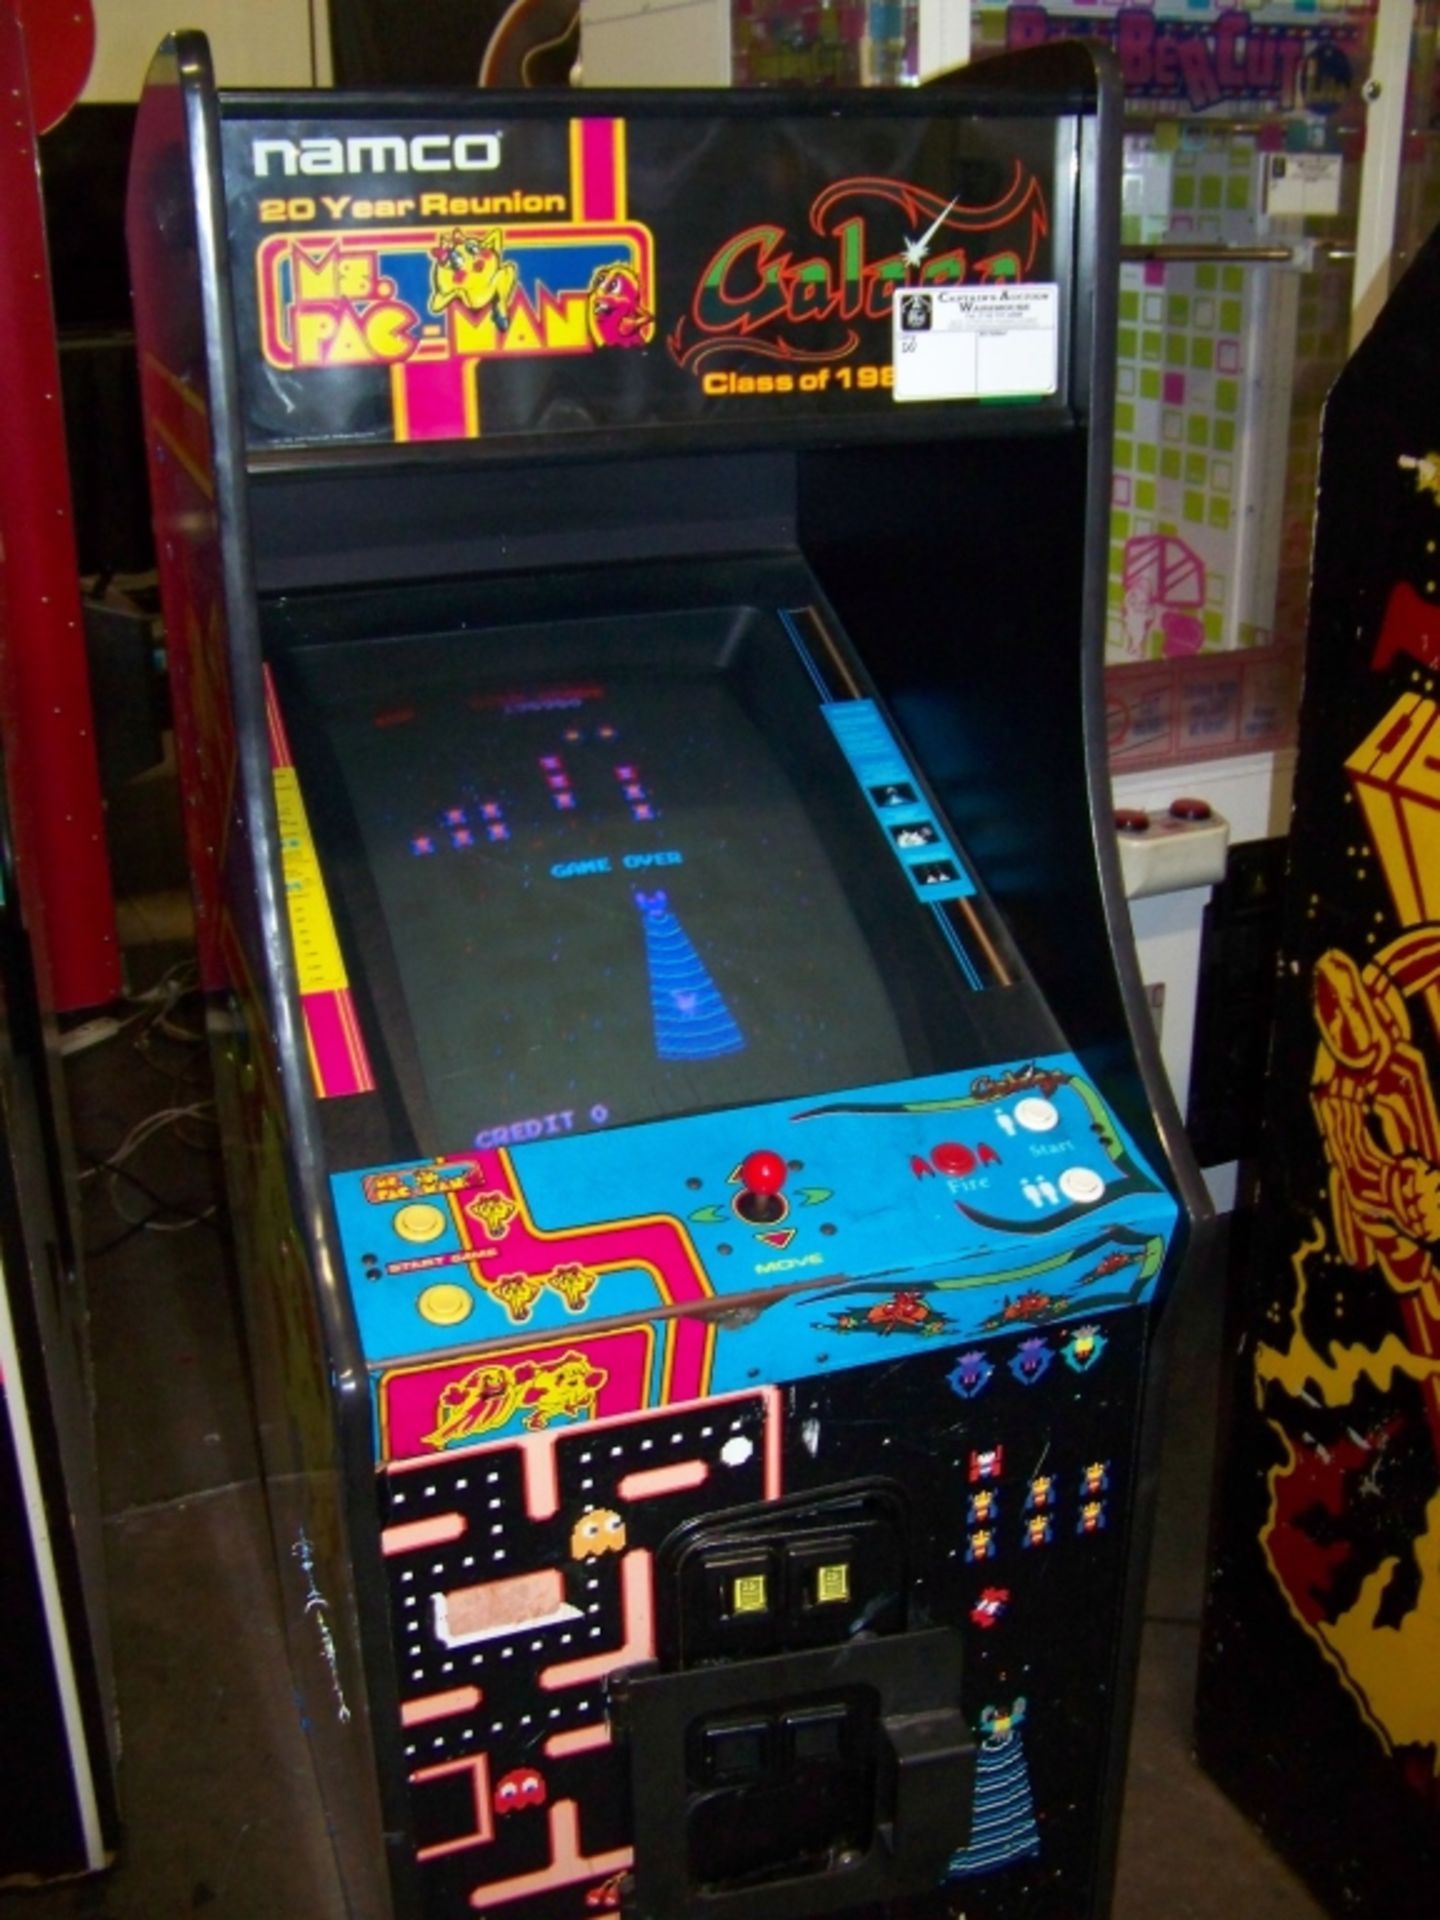 MS. PACMAN GALAGA CLASS OF 1981 ARCADE GAME - Image 5 of 5